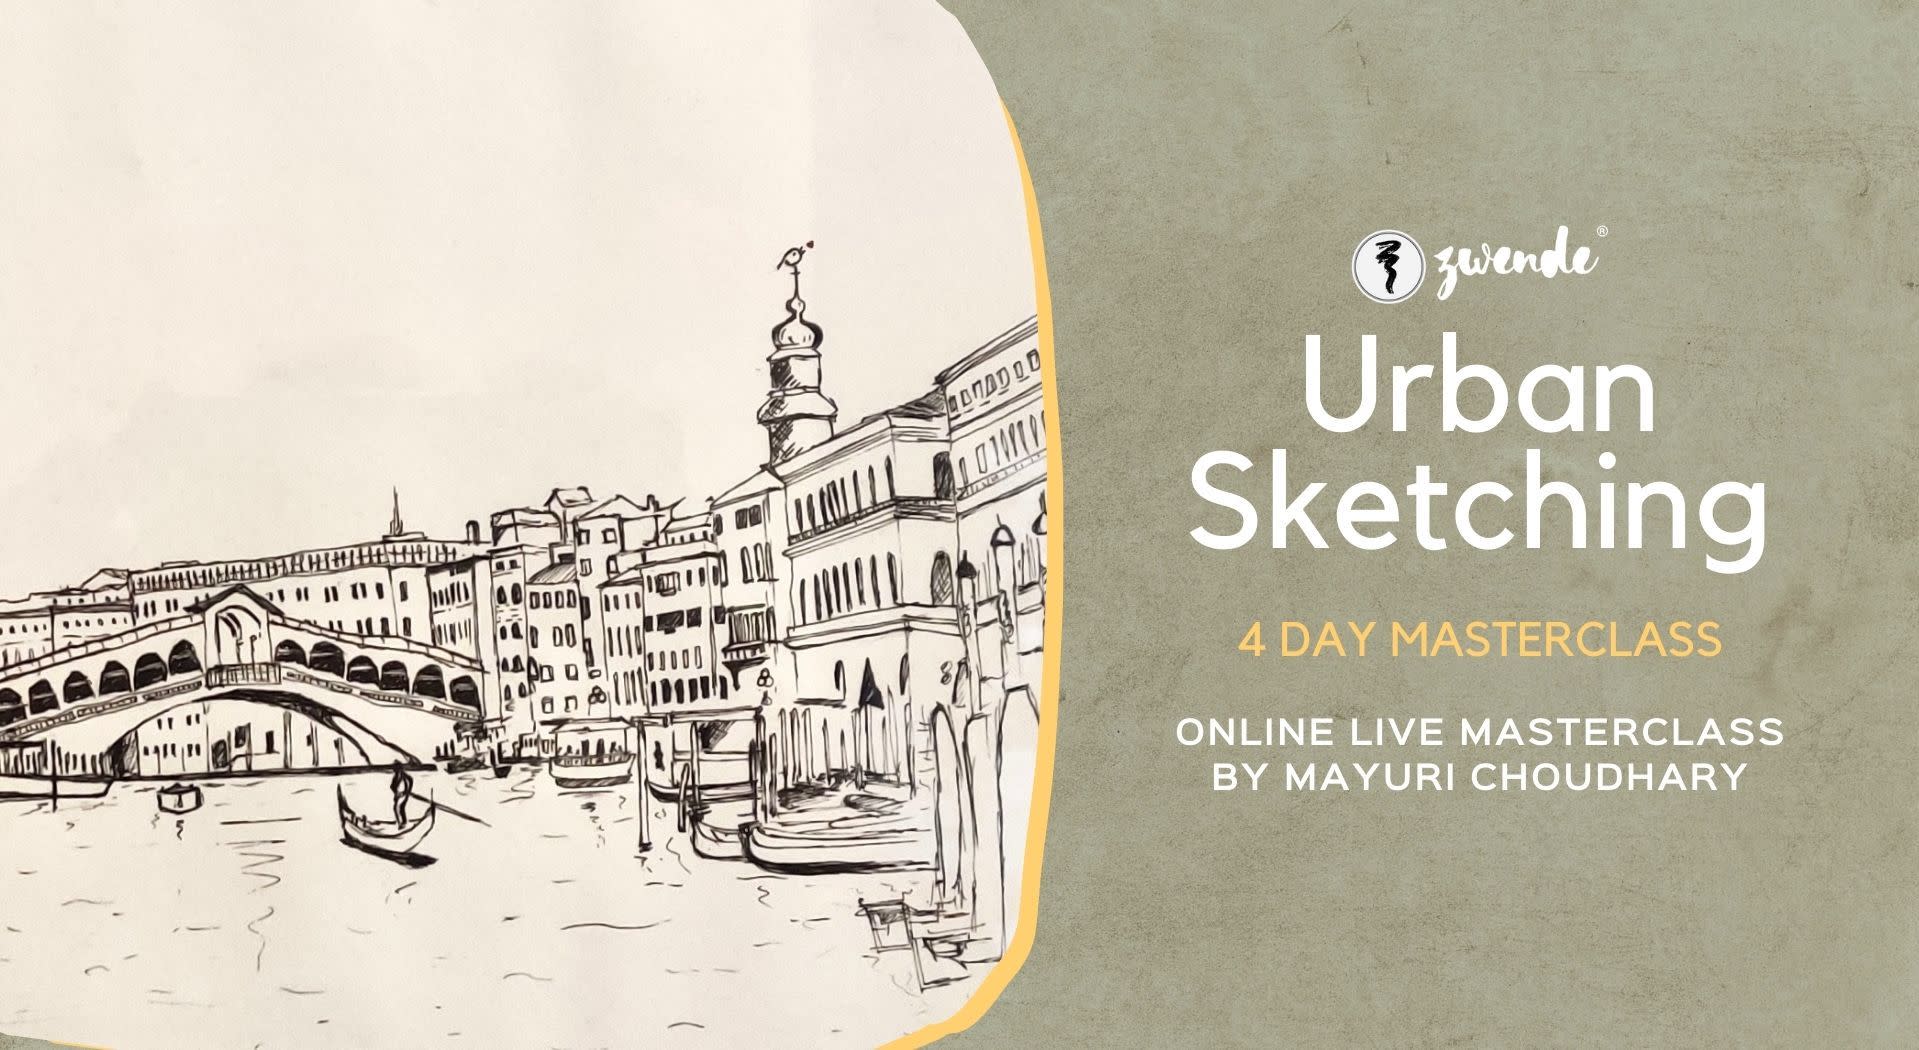 5 Online Urban Sketching Courses To Take in 2022